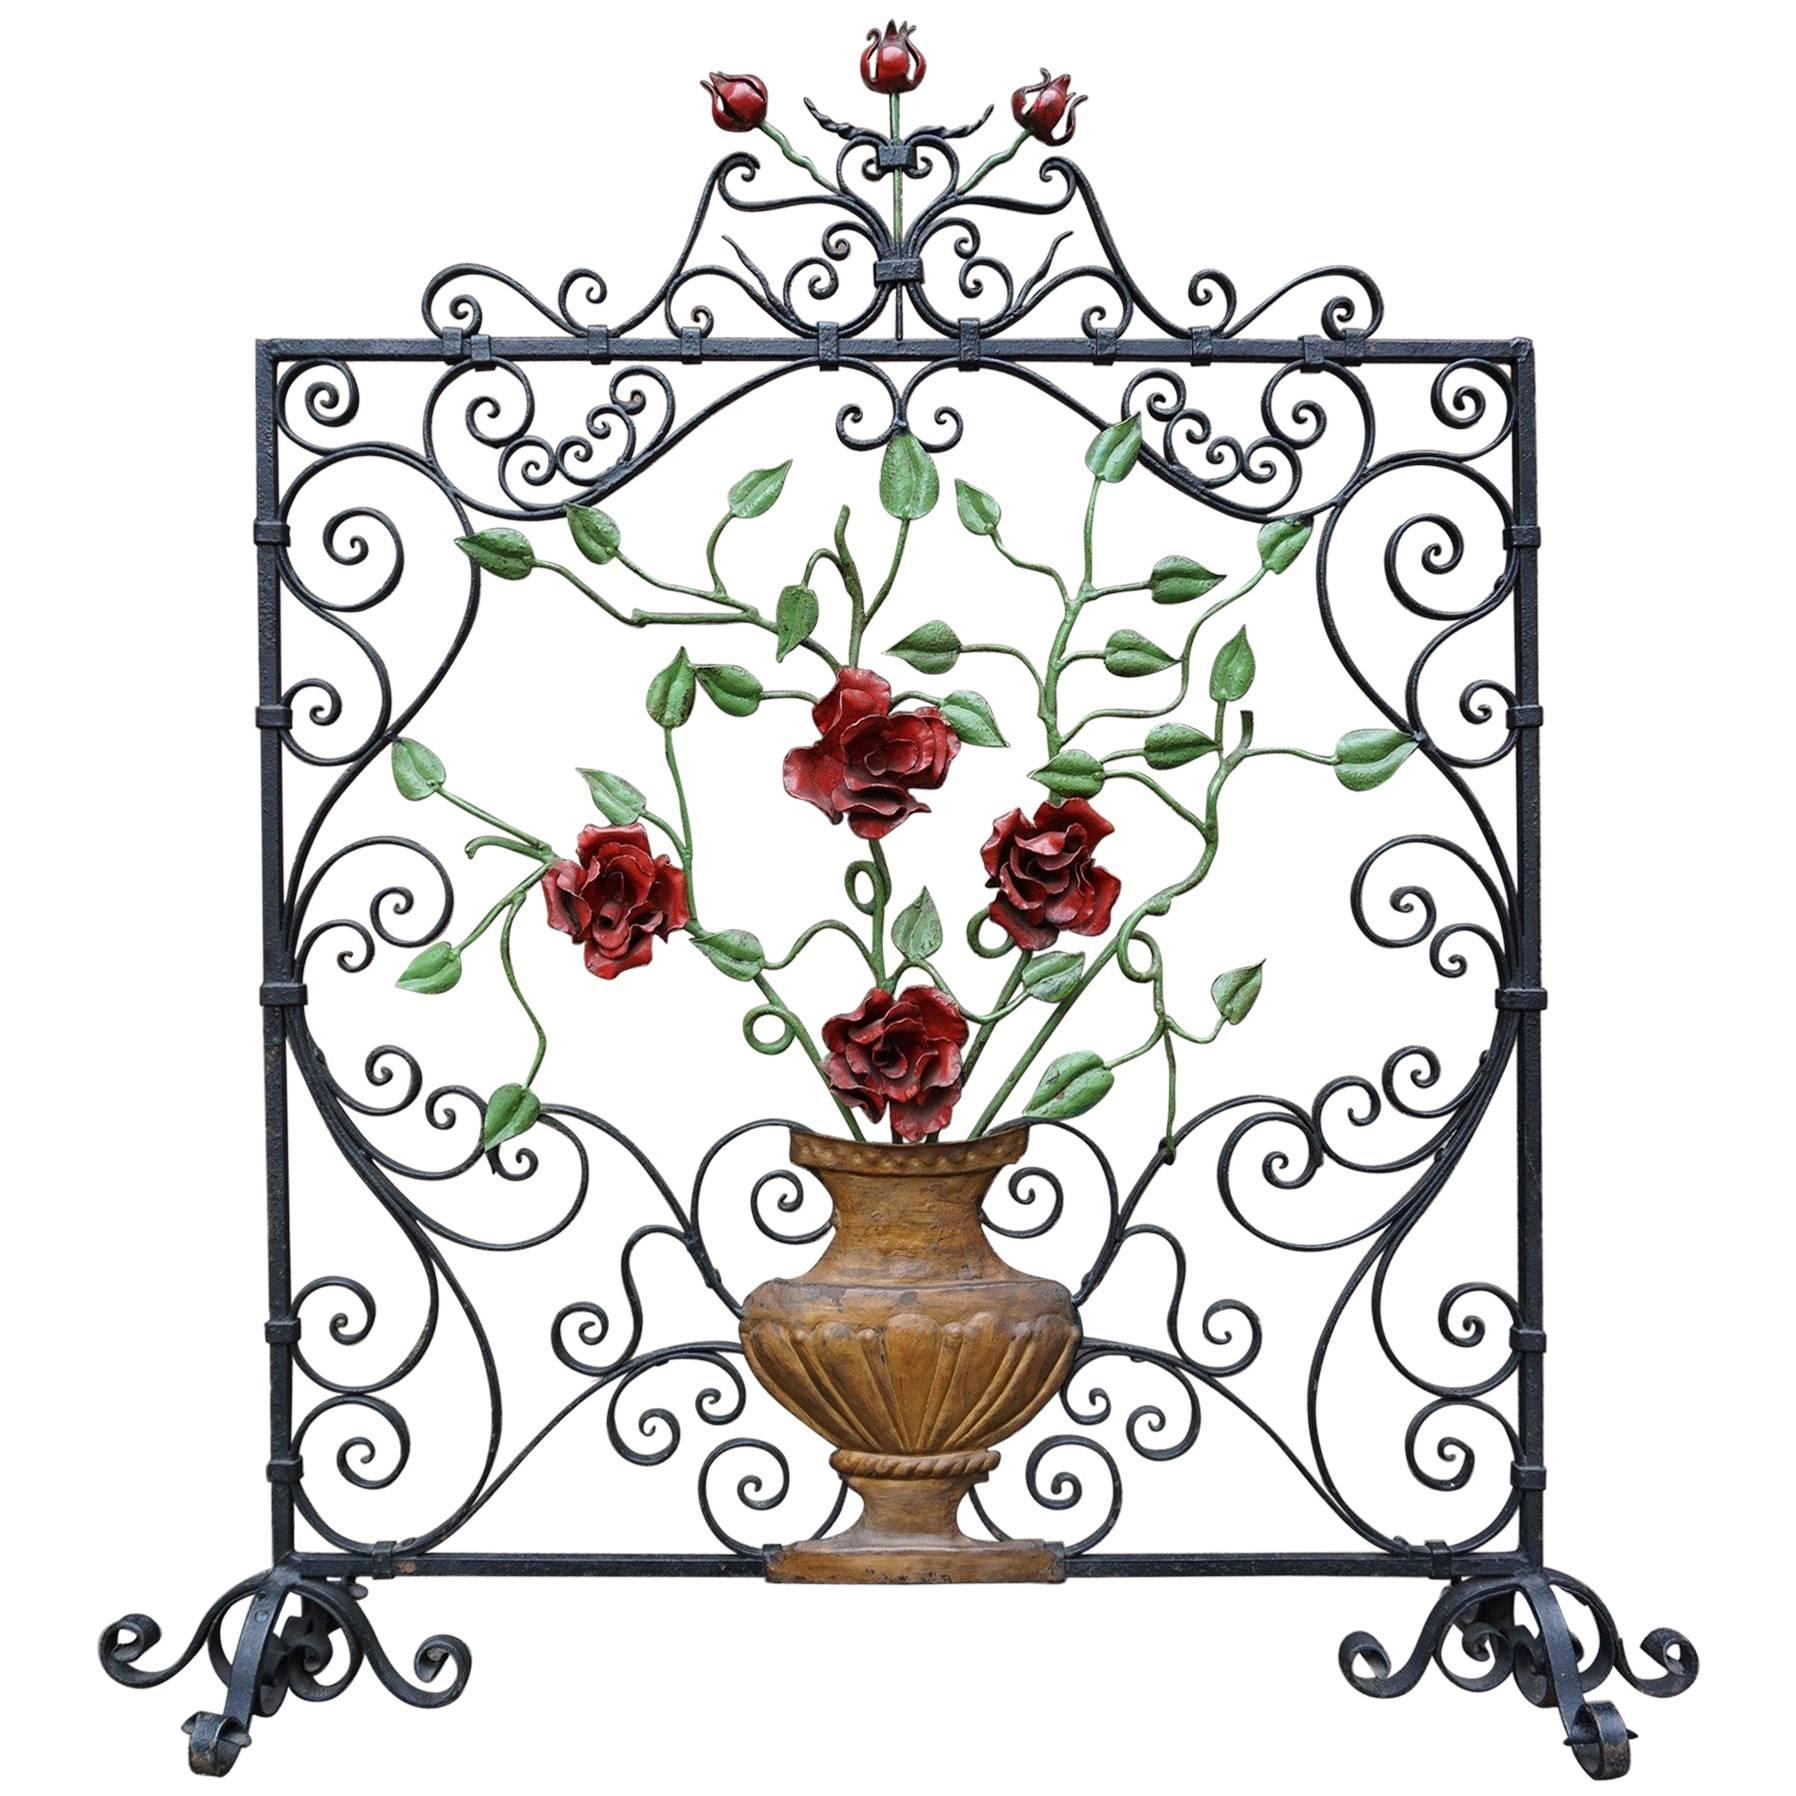 Early 20th Century Handcrafted Wrought Iron Firescreen with Roses in Vase Decor